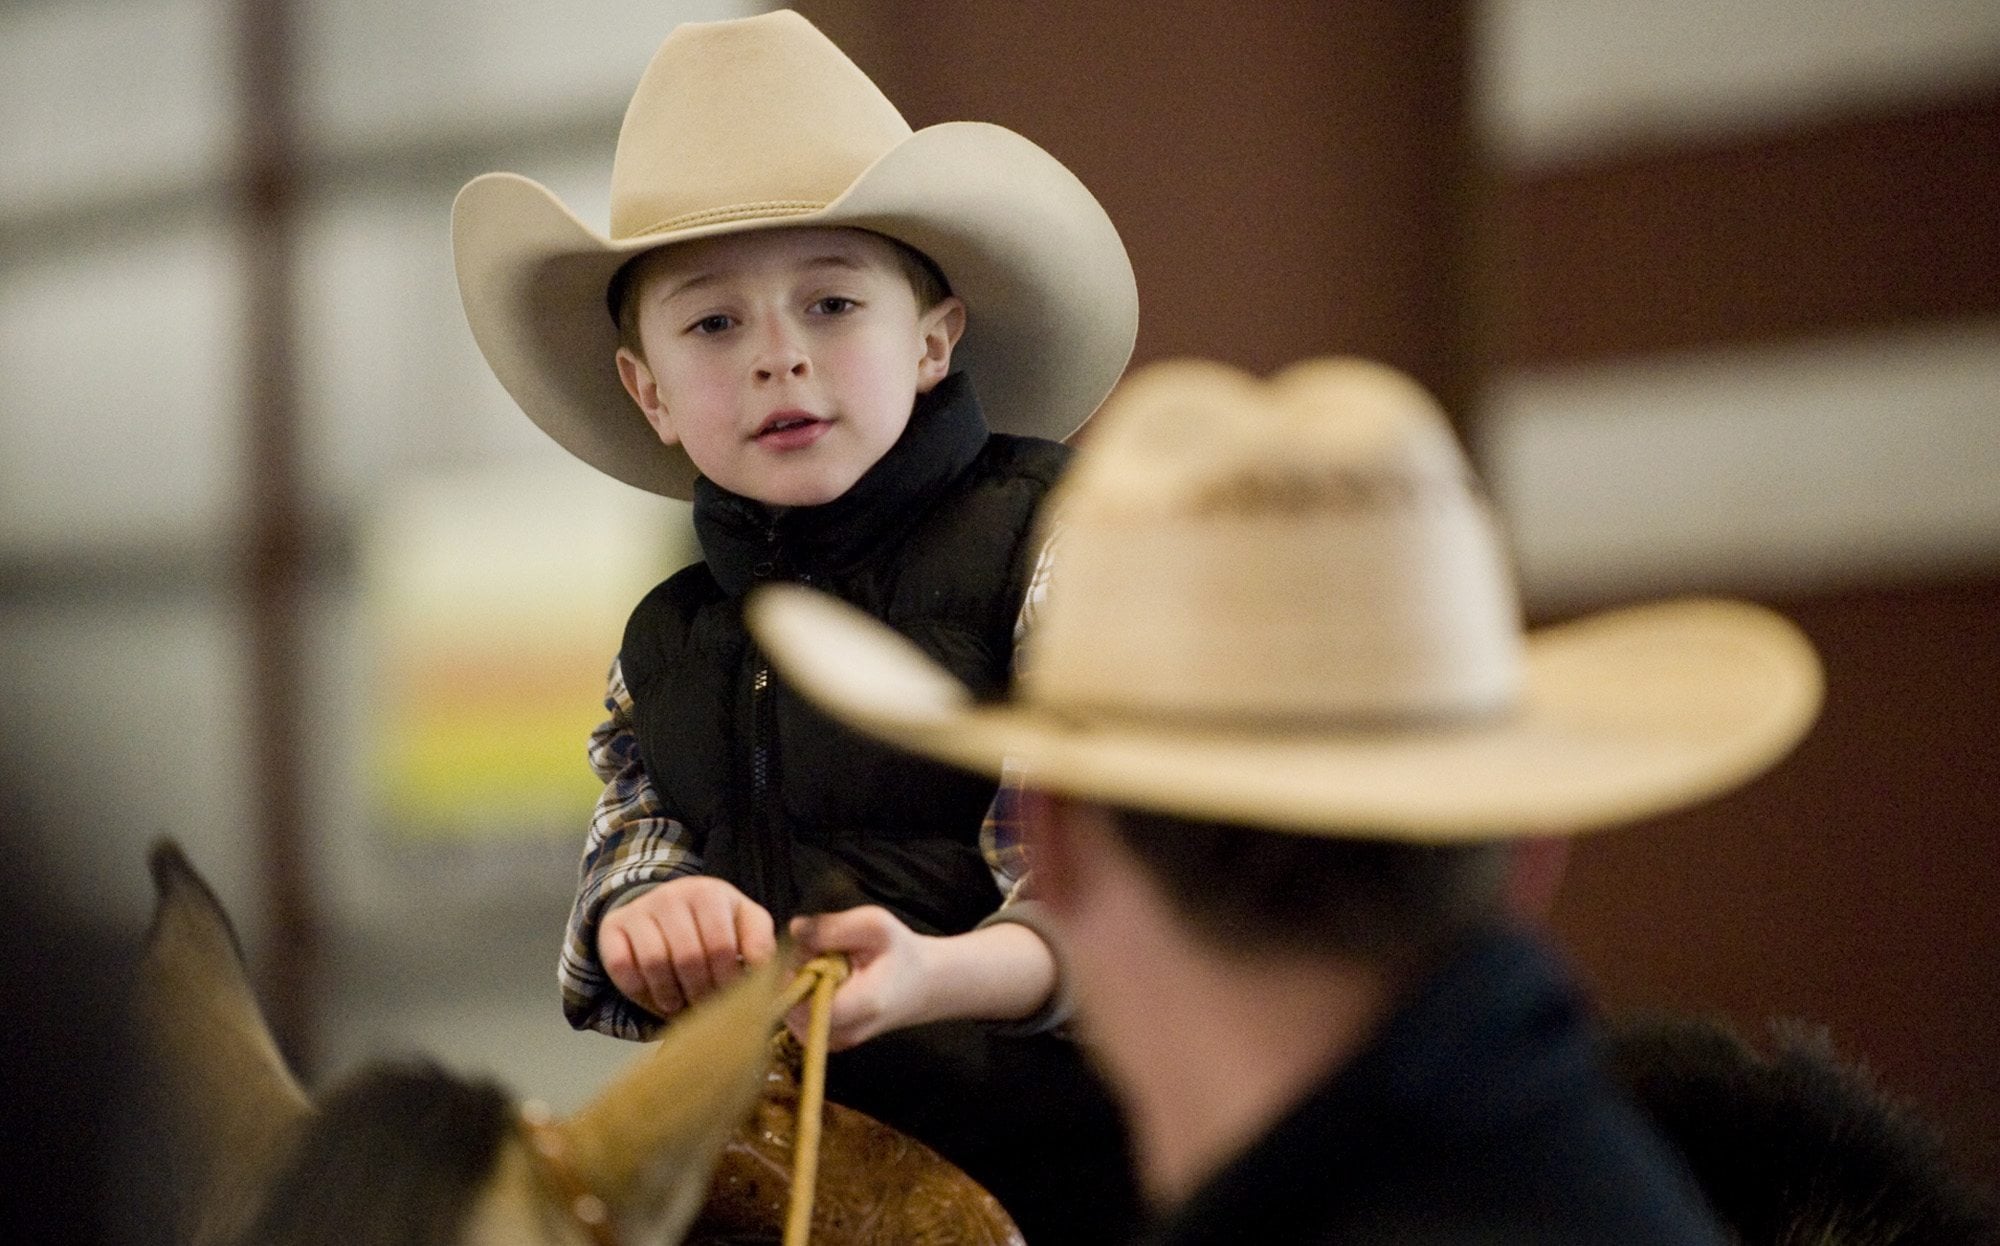 Dane Bardue, 6, and his uncle Luke Bardue attend the Winter Woolies horse show at the Jack Giesy horse arena at the Clark County Fairgrounds in February 2011.